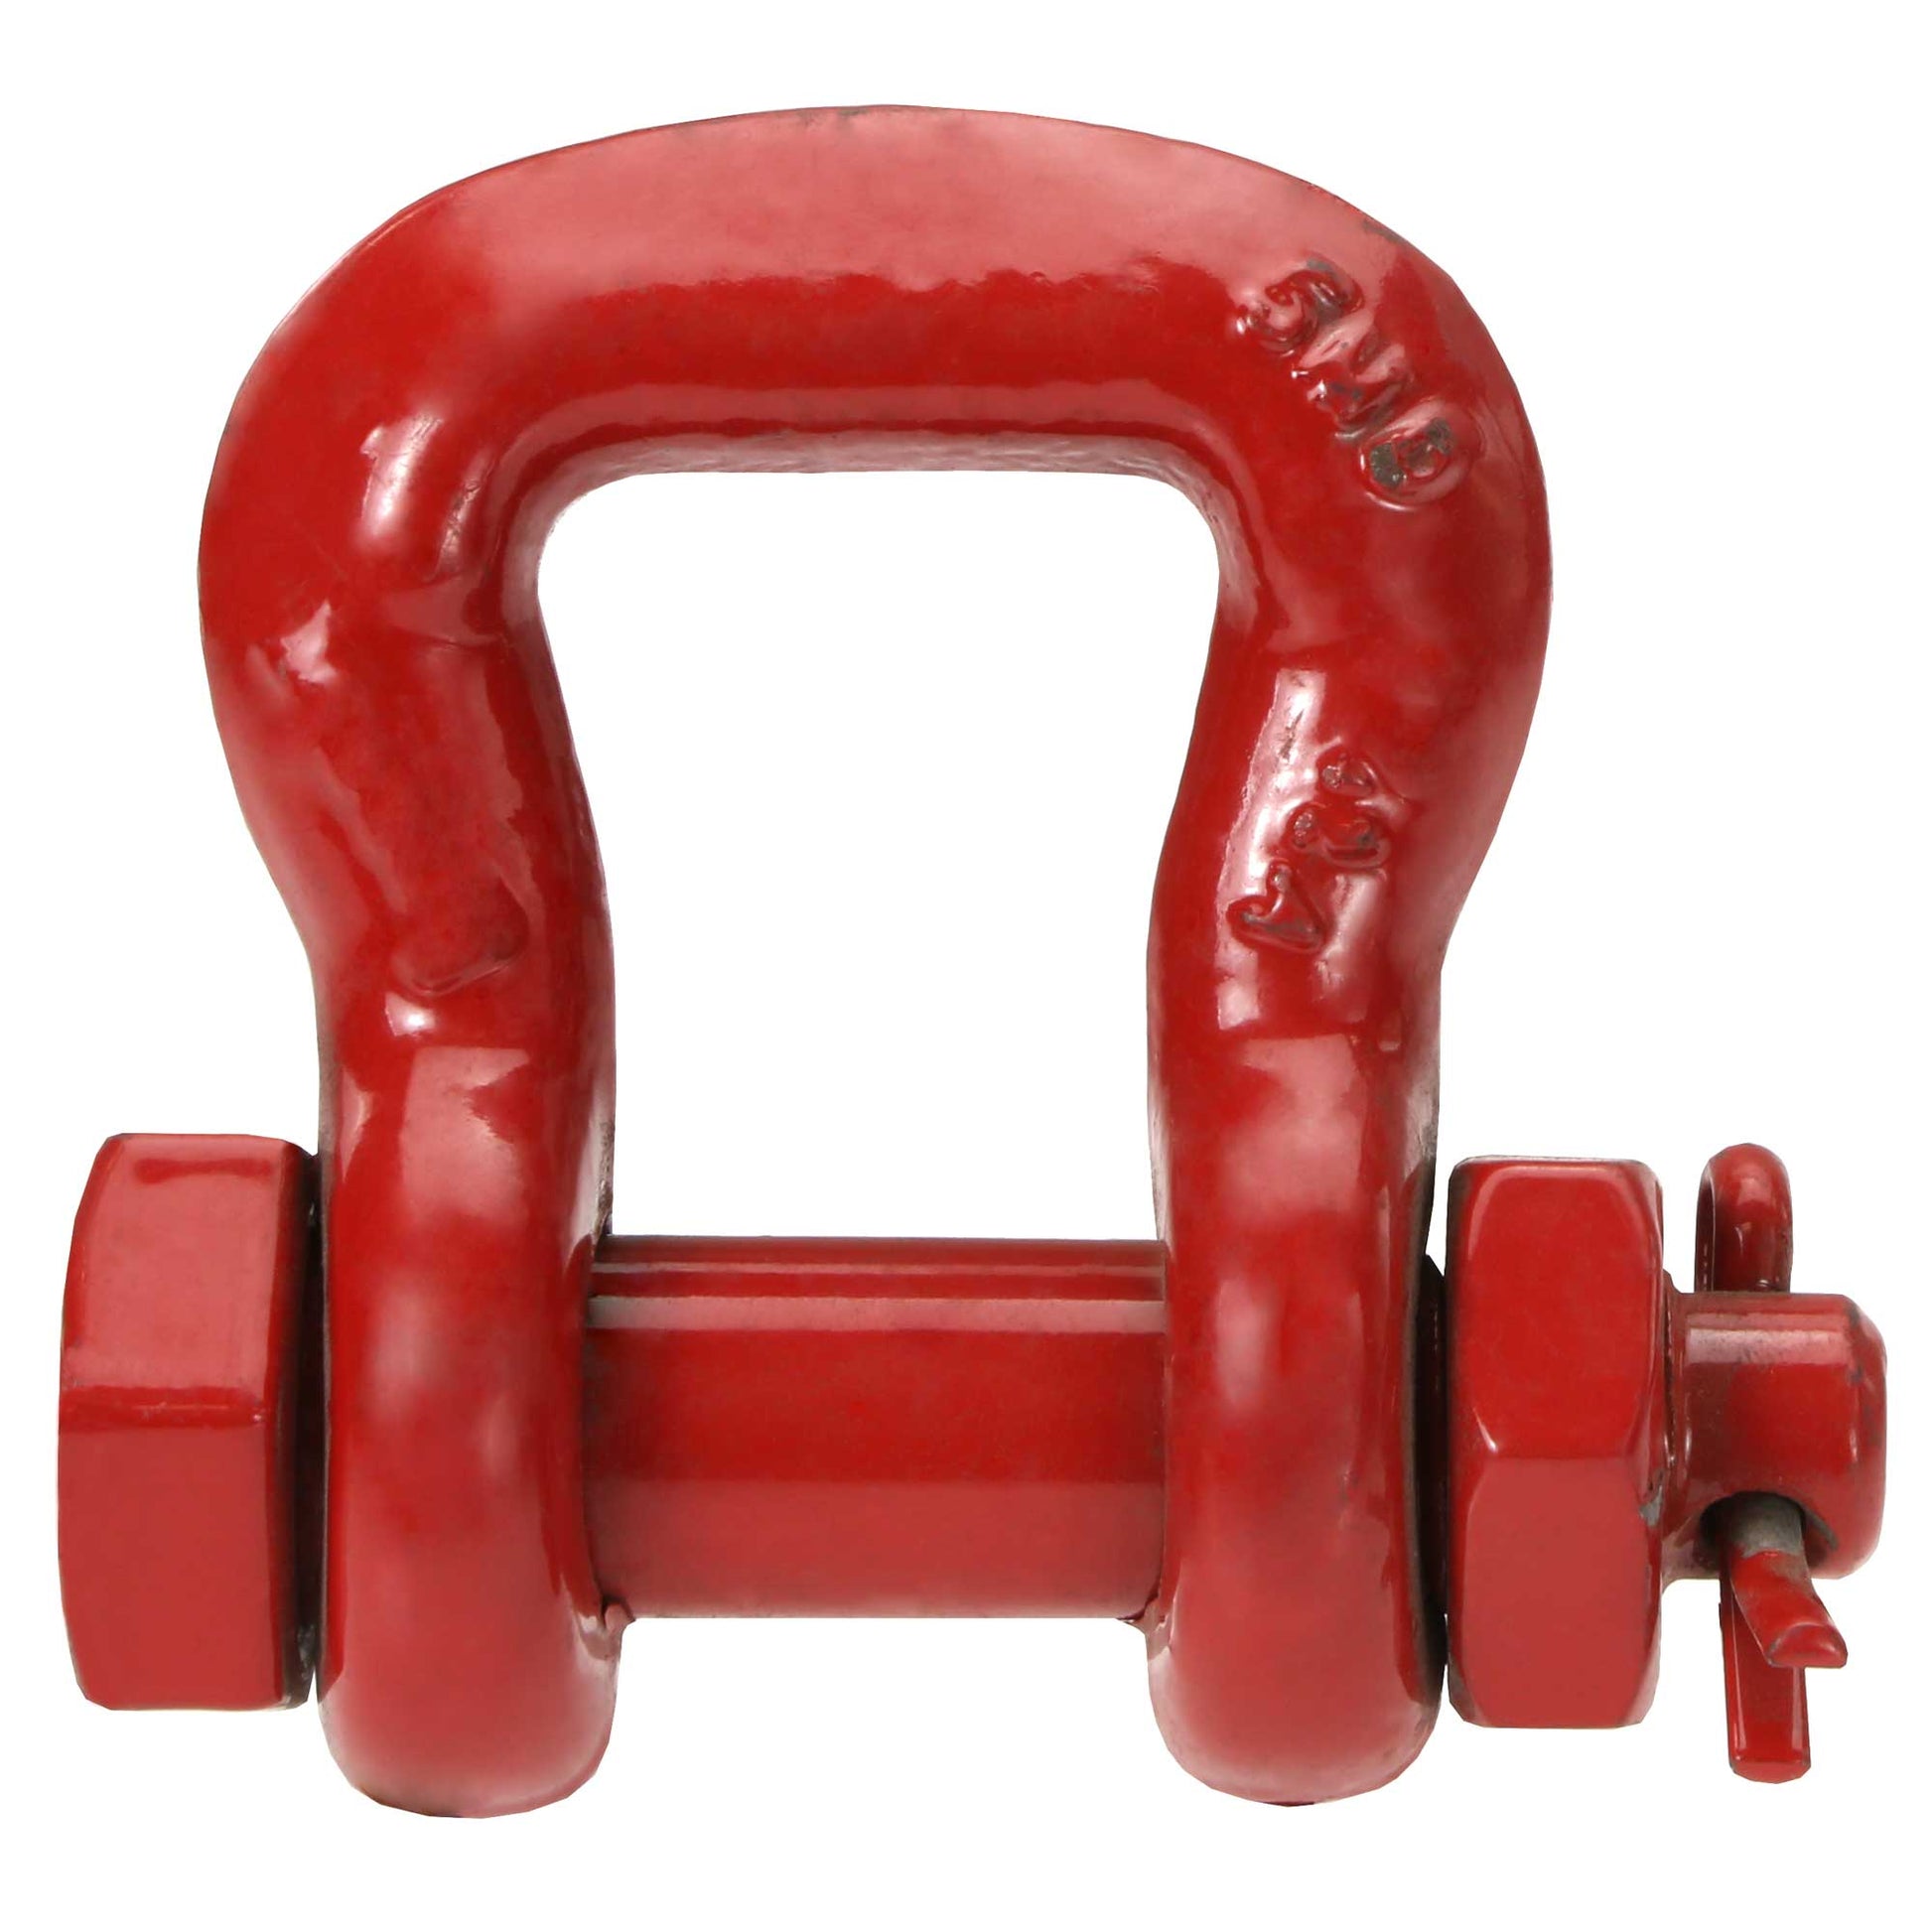 Crosby® Bolt Type Sling Saver Shackle | S-252 - 4"- 20.5 Ton primary image